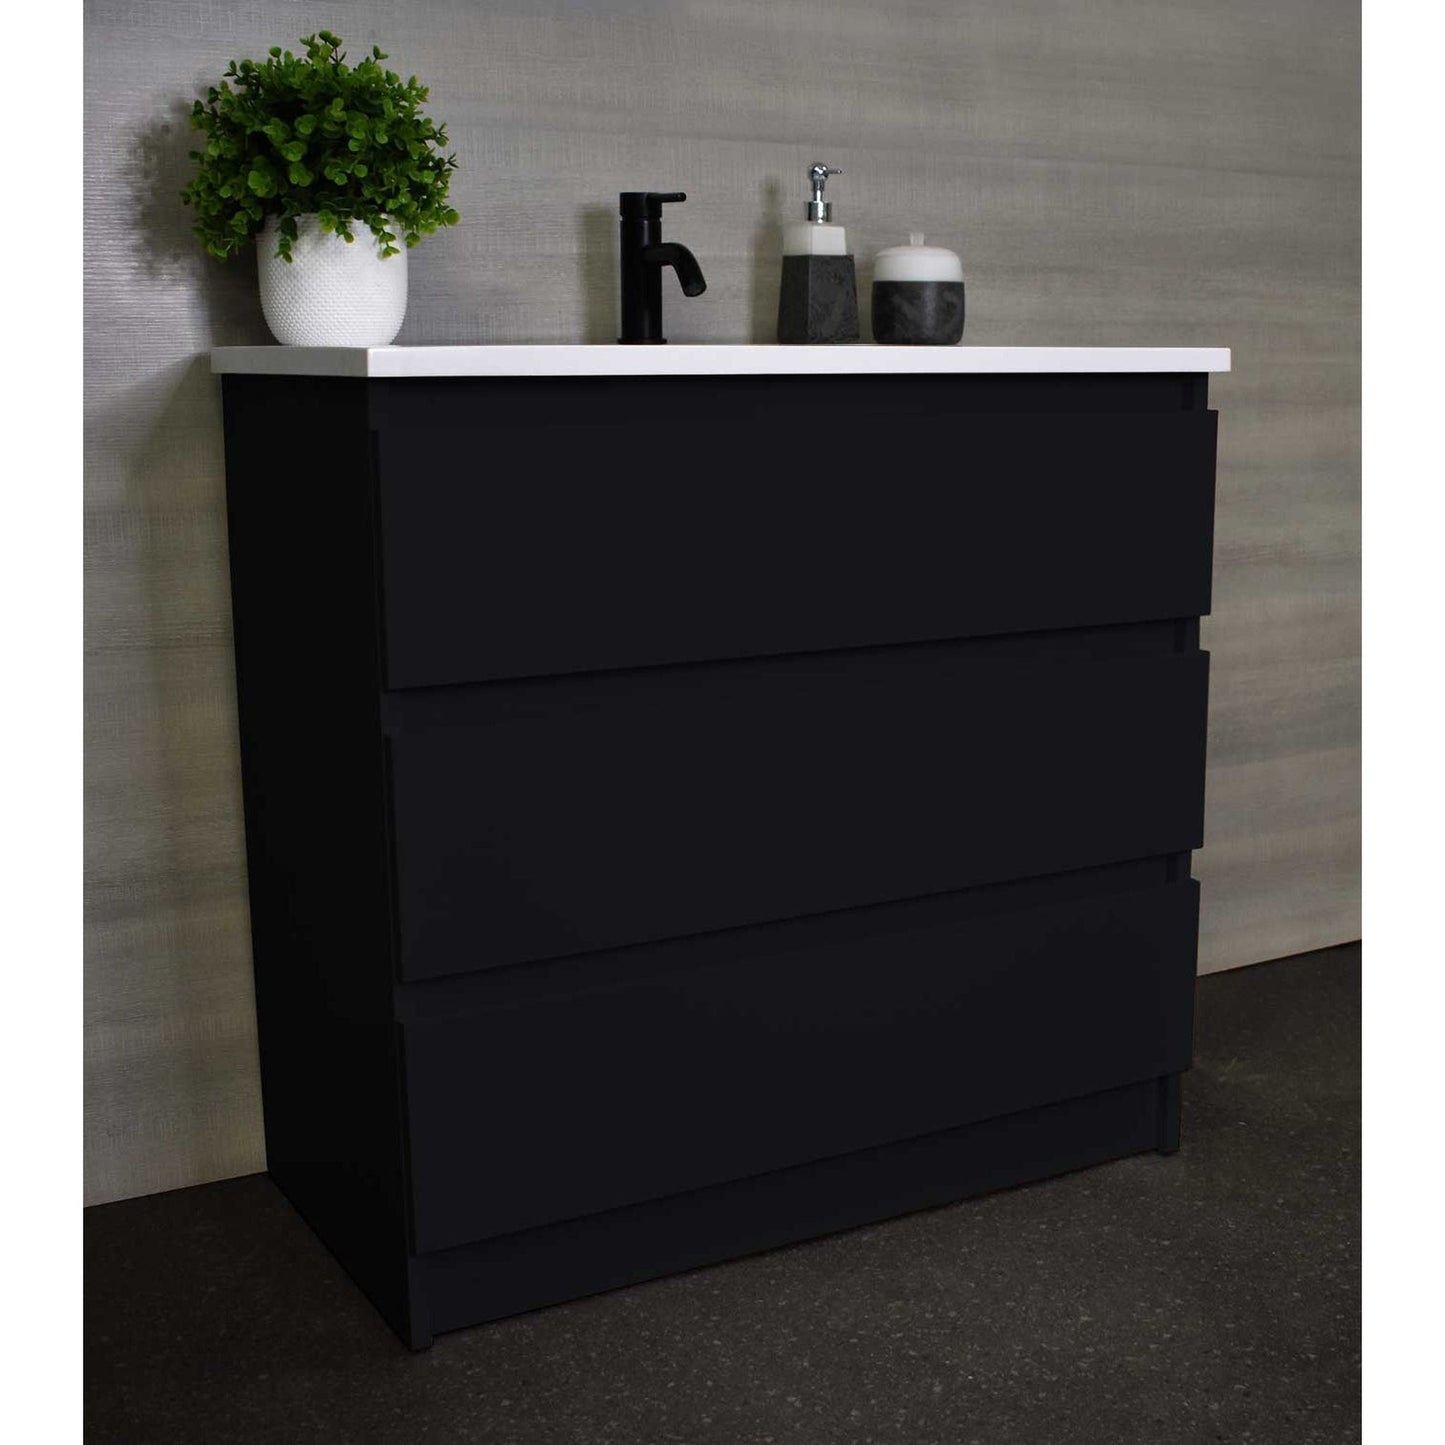 Volpa USA Pepper 36" x 20" Glossy Black Modern Freestanding Bathroom Vanity With Acrylic Top, Integrated Acrylic Sink and drawers